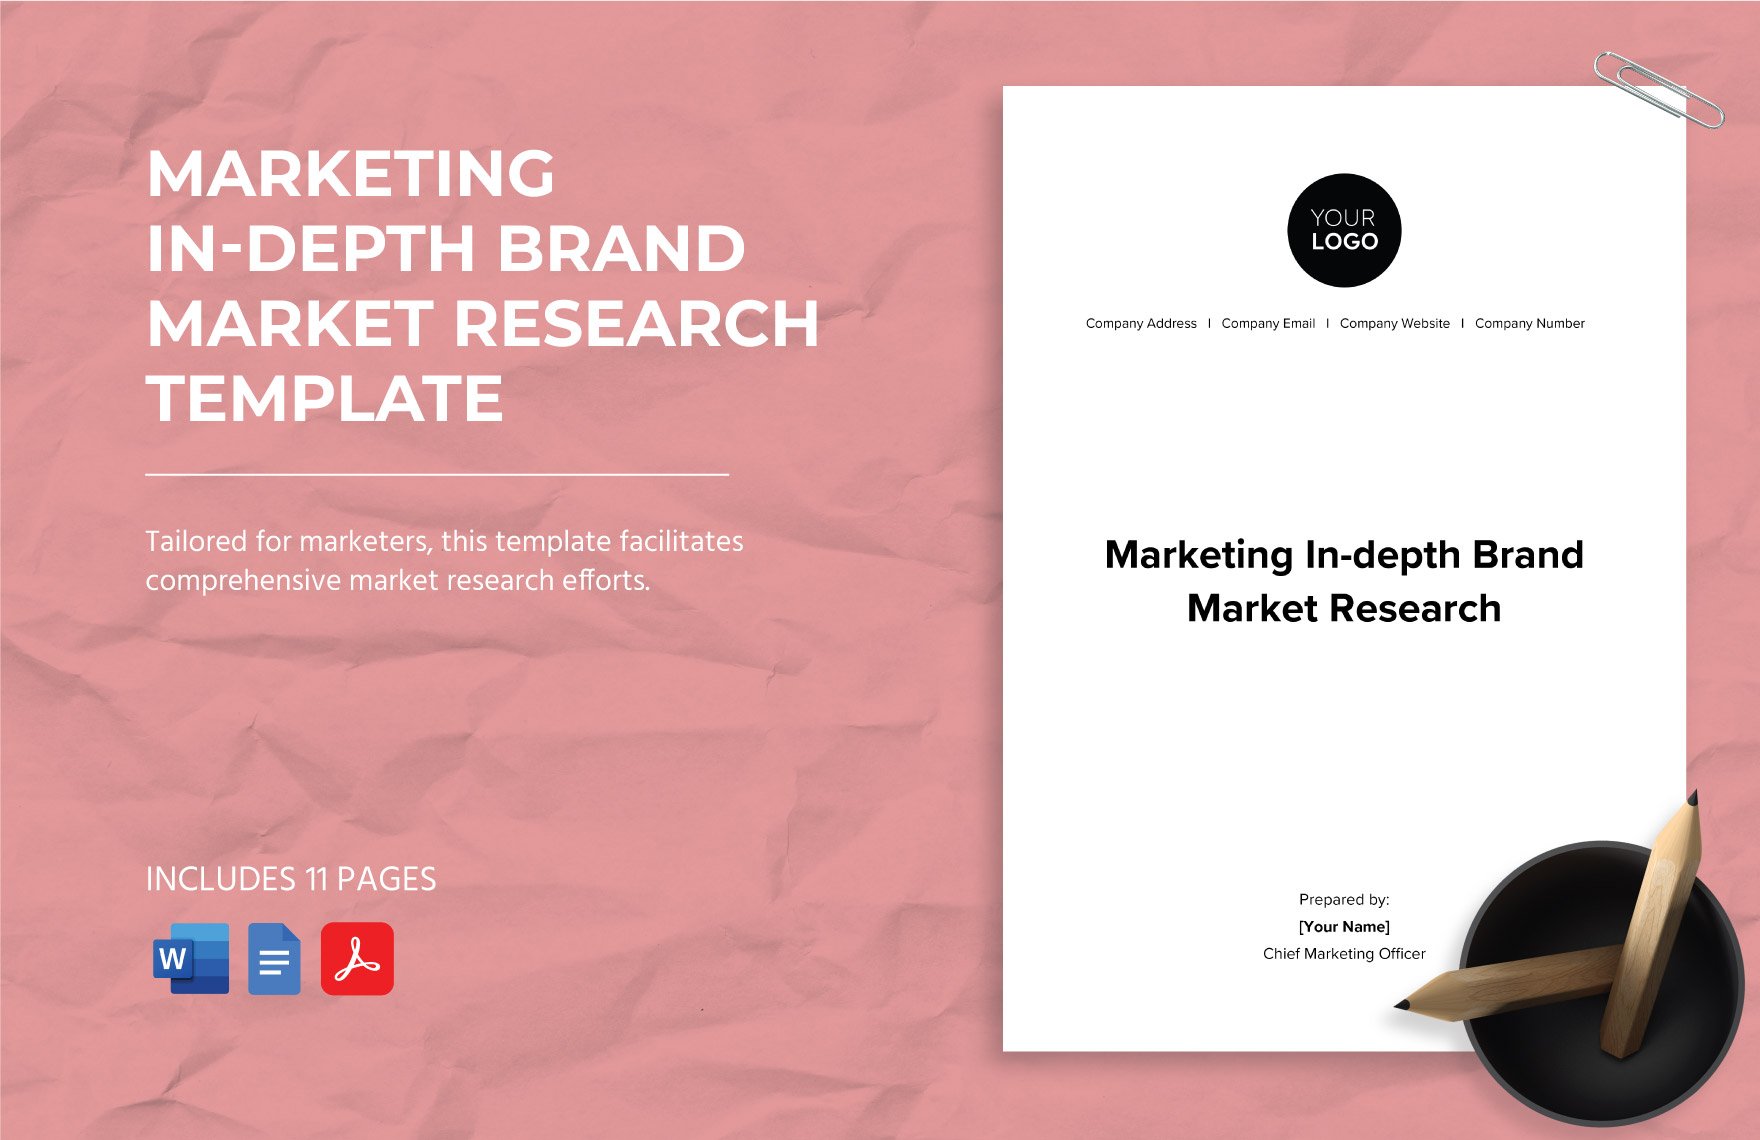 Marketing In-depth Brand Market Research Template